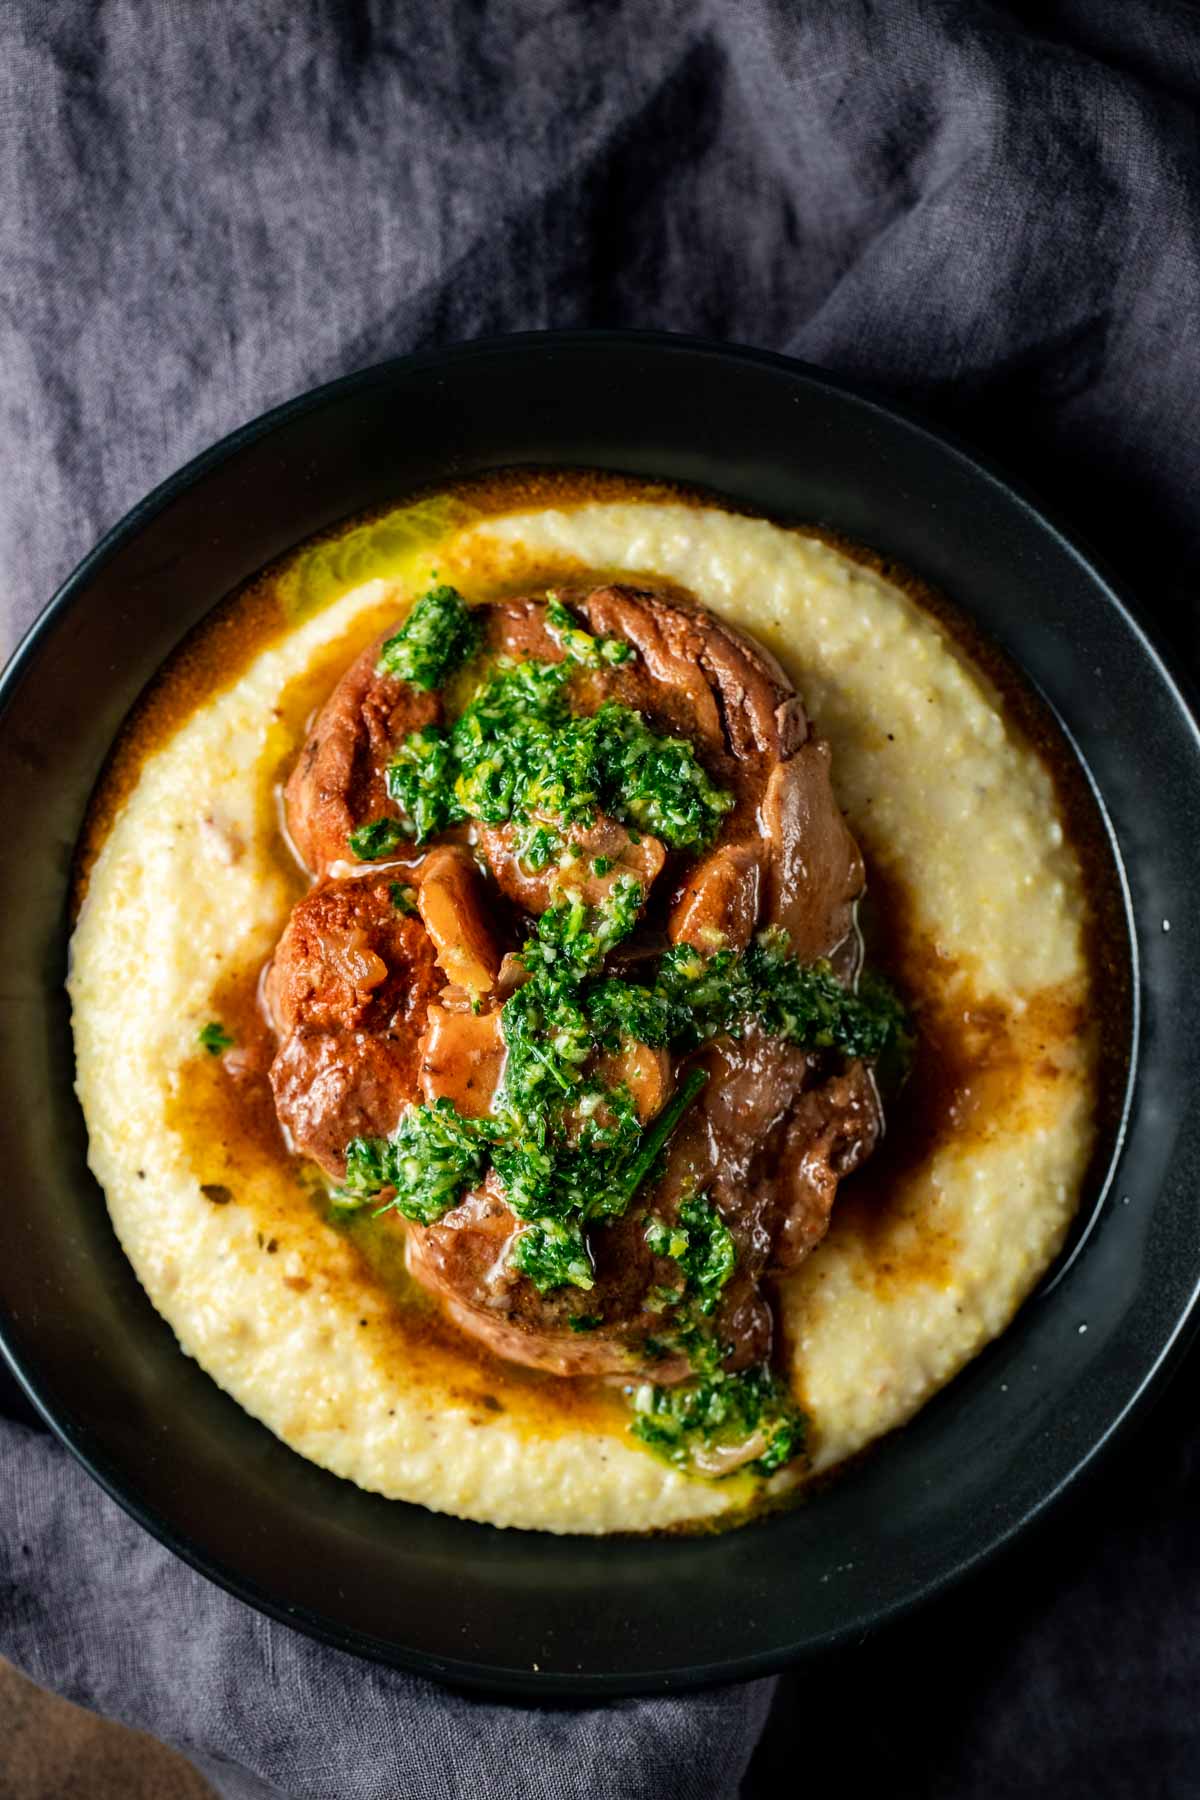 Overhead view of sous vide osso buco served on polenta with gremolata as garnish.